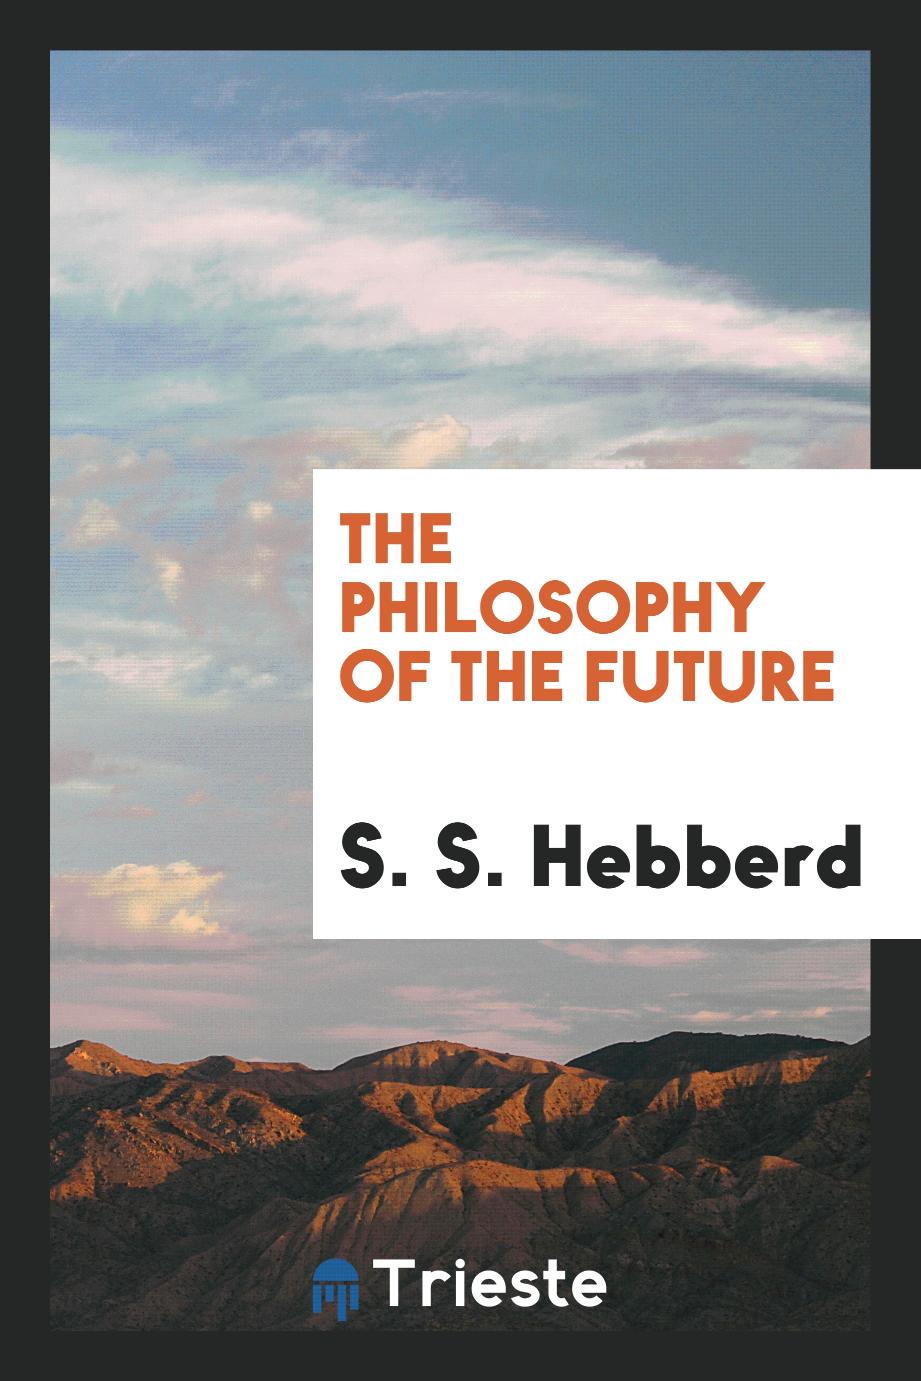 The philosophy of the future